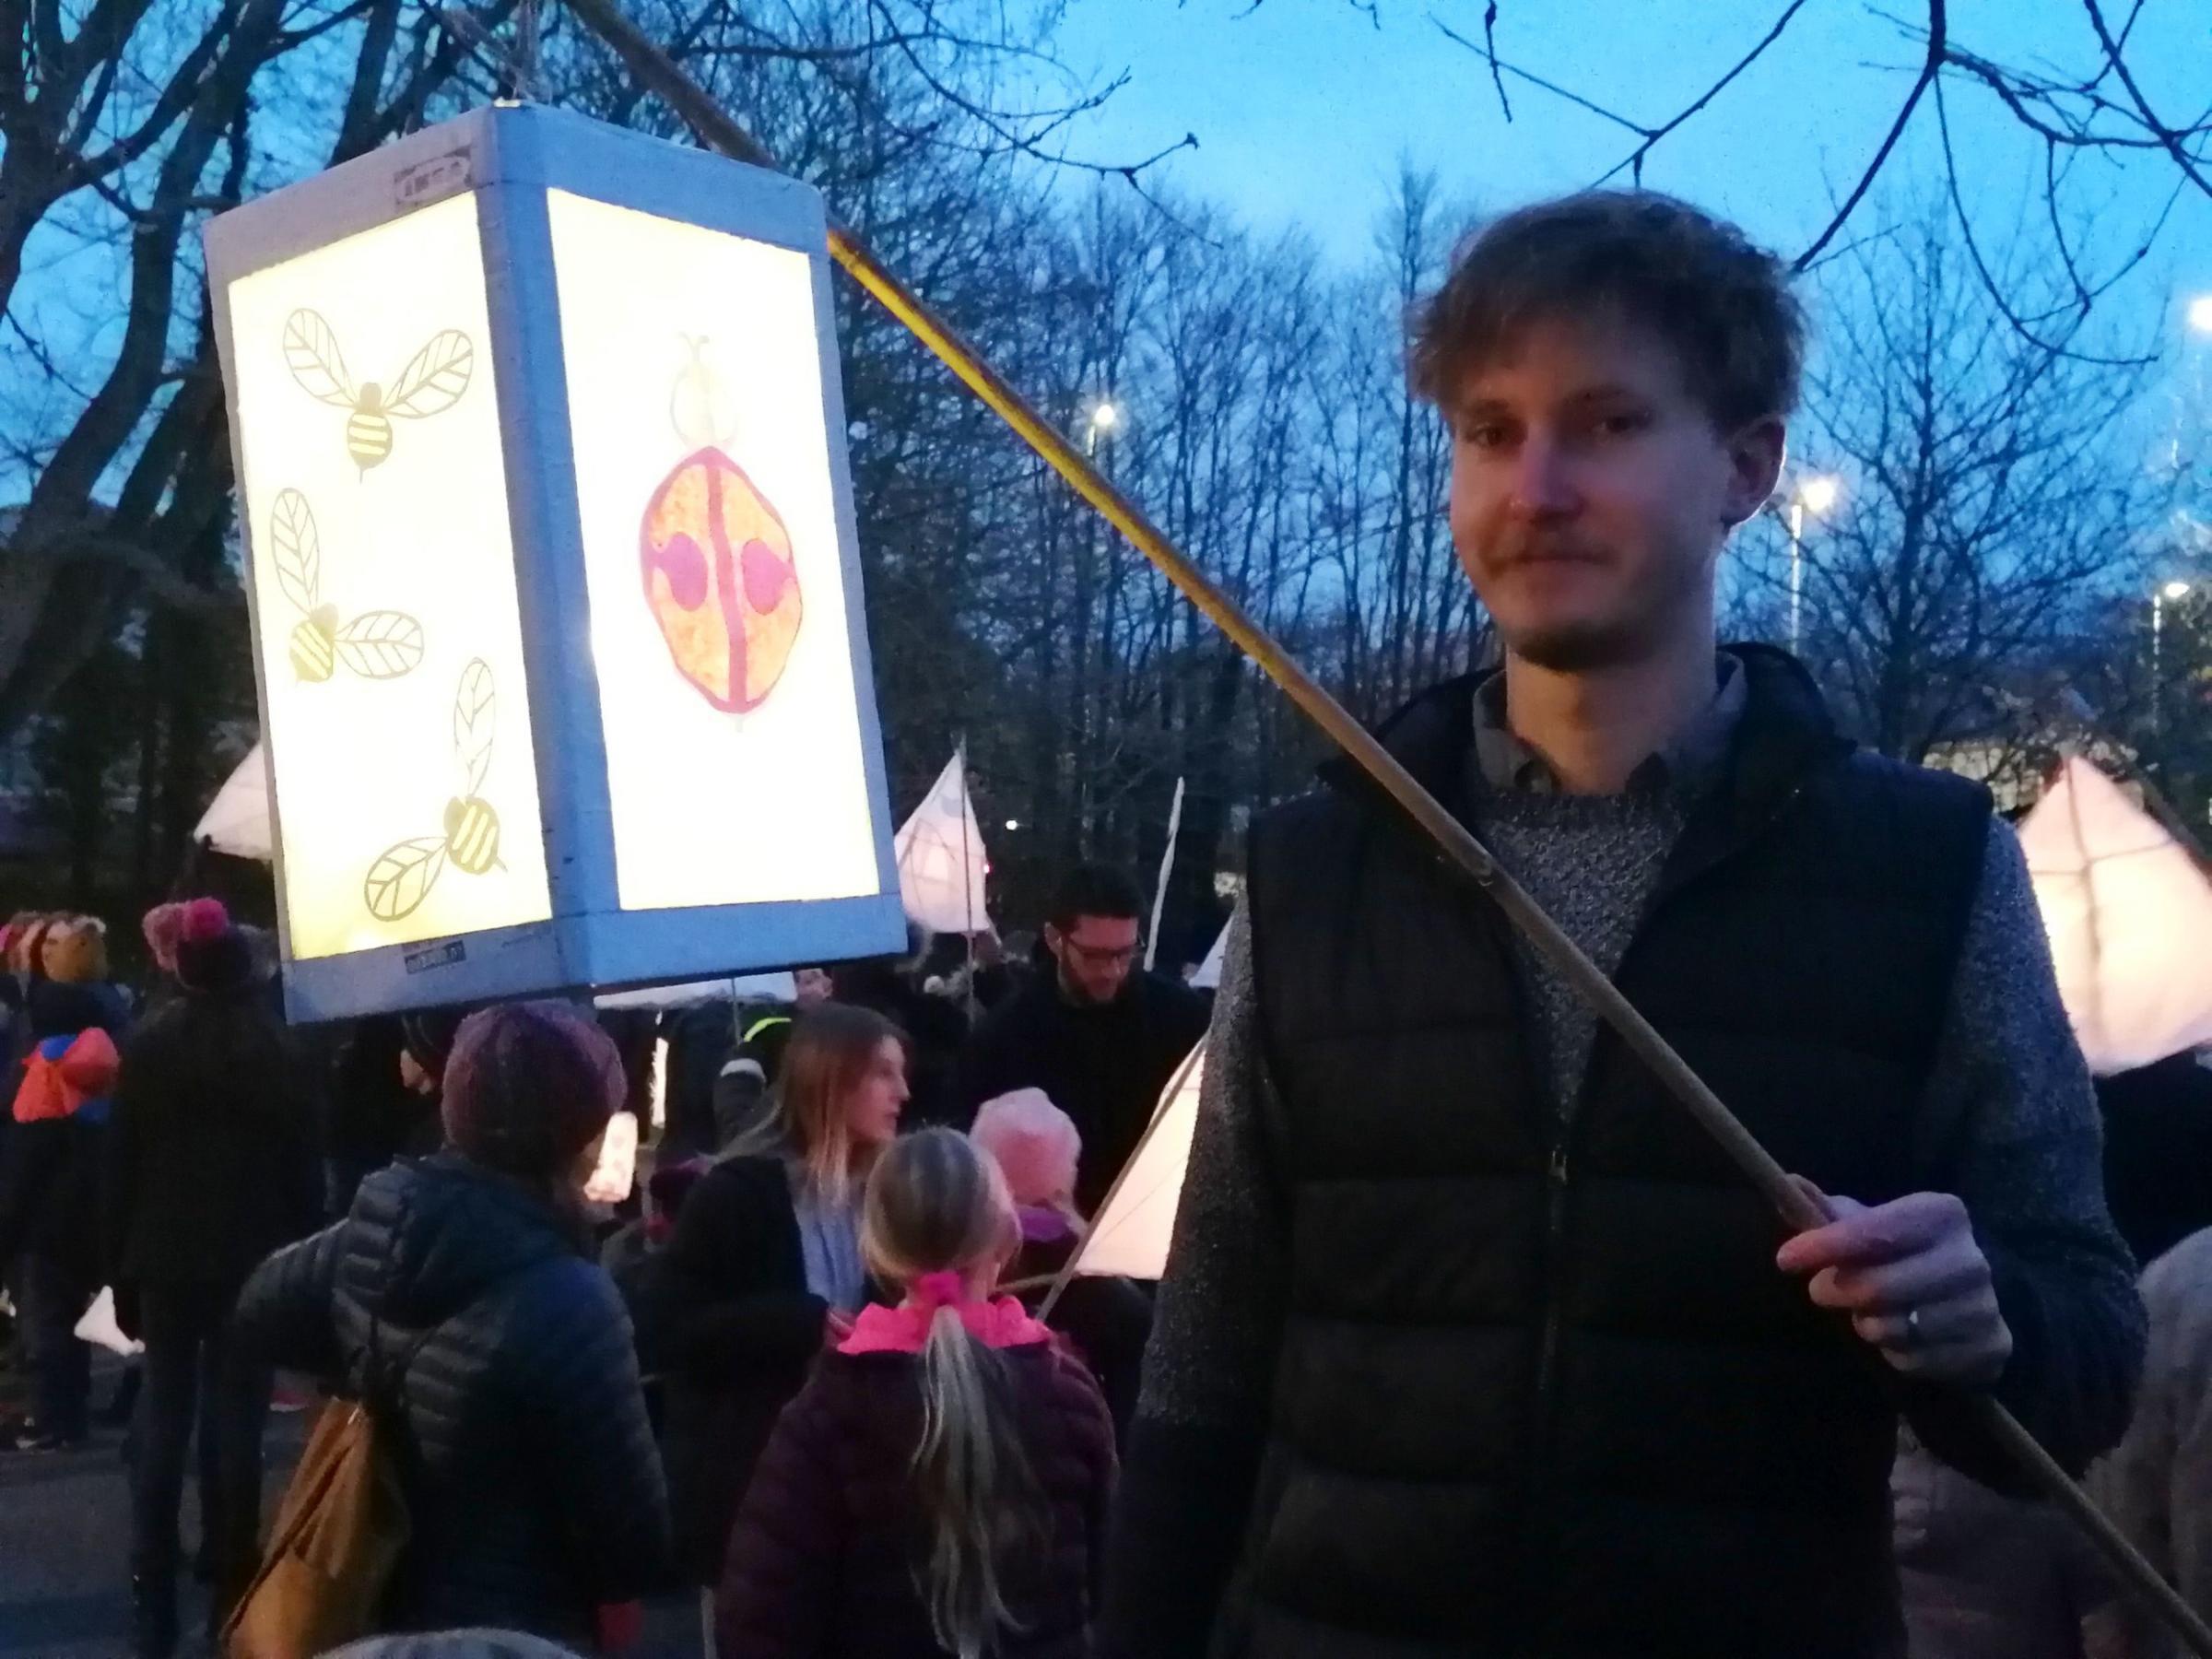 Simon holds a lantern made by his daughter Matilda, who was sadly unwell and unable to attend